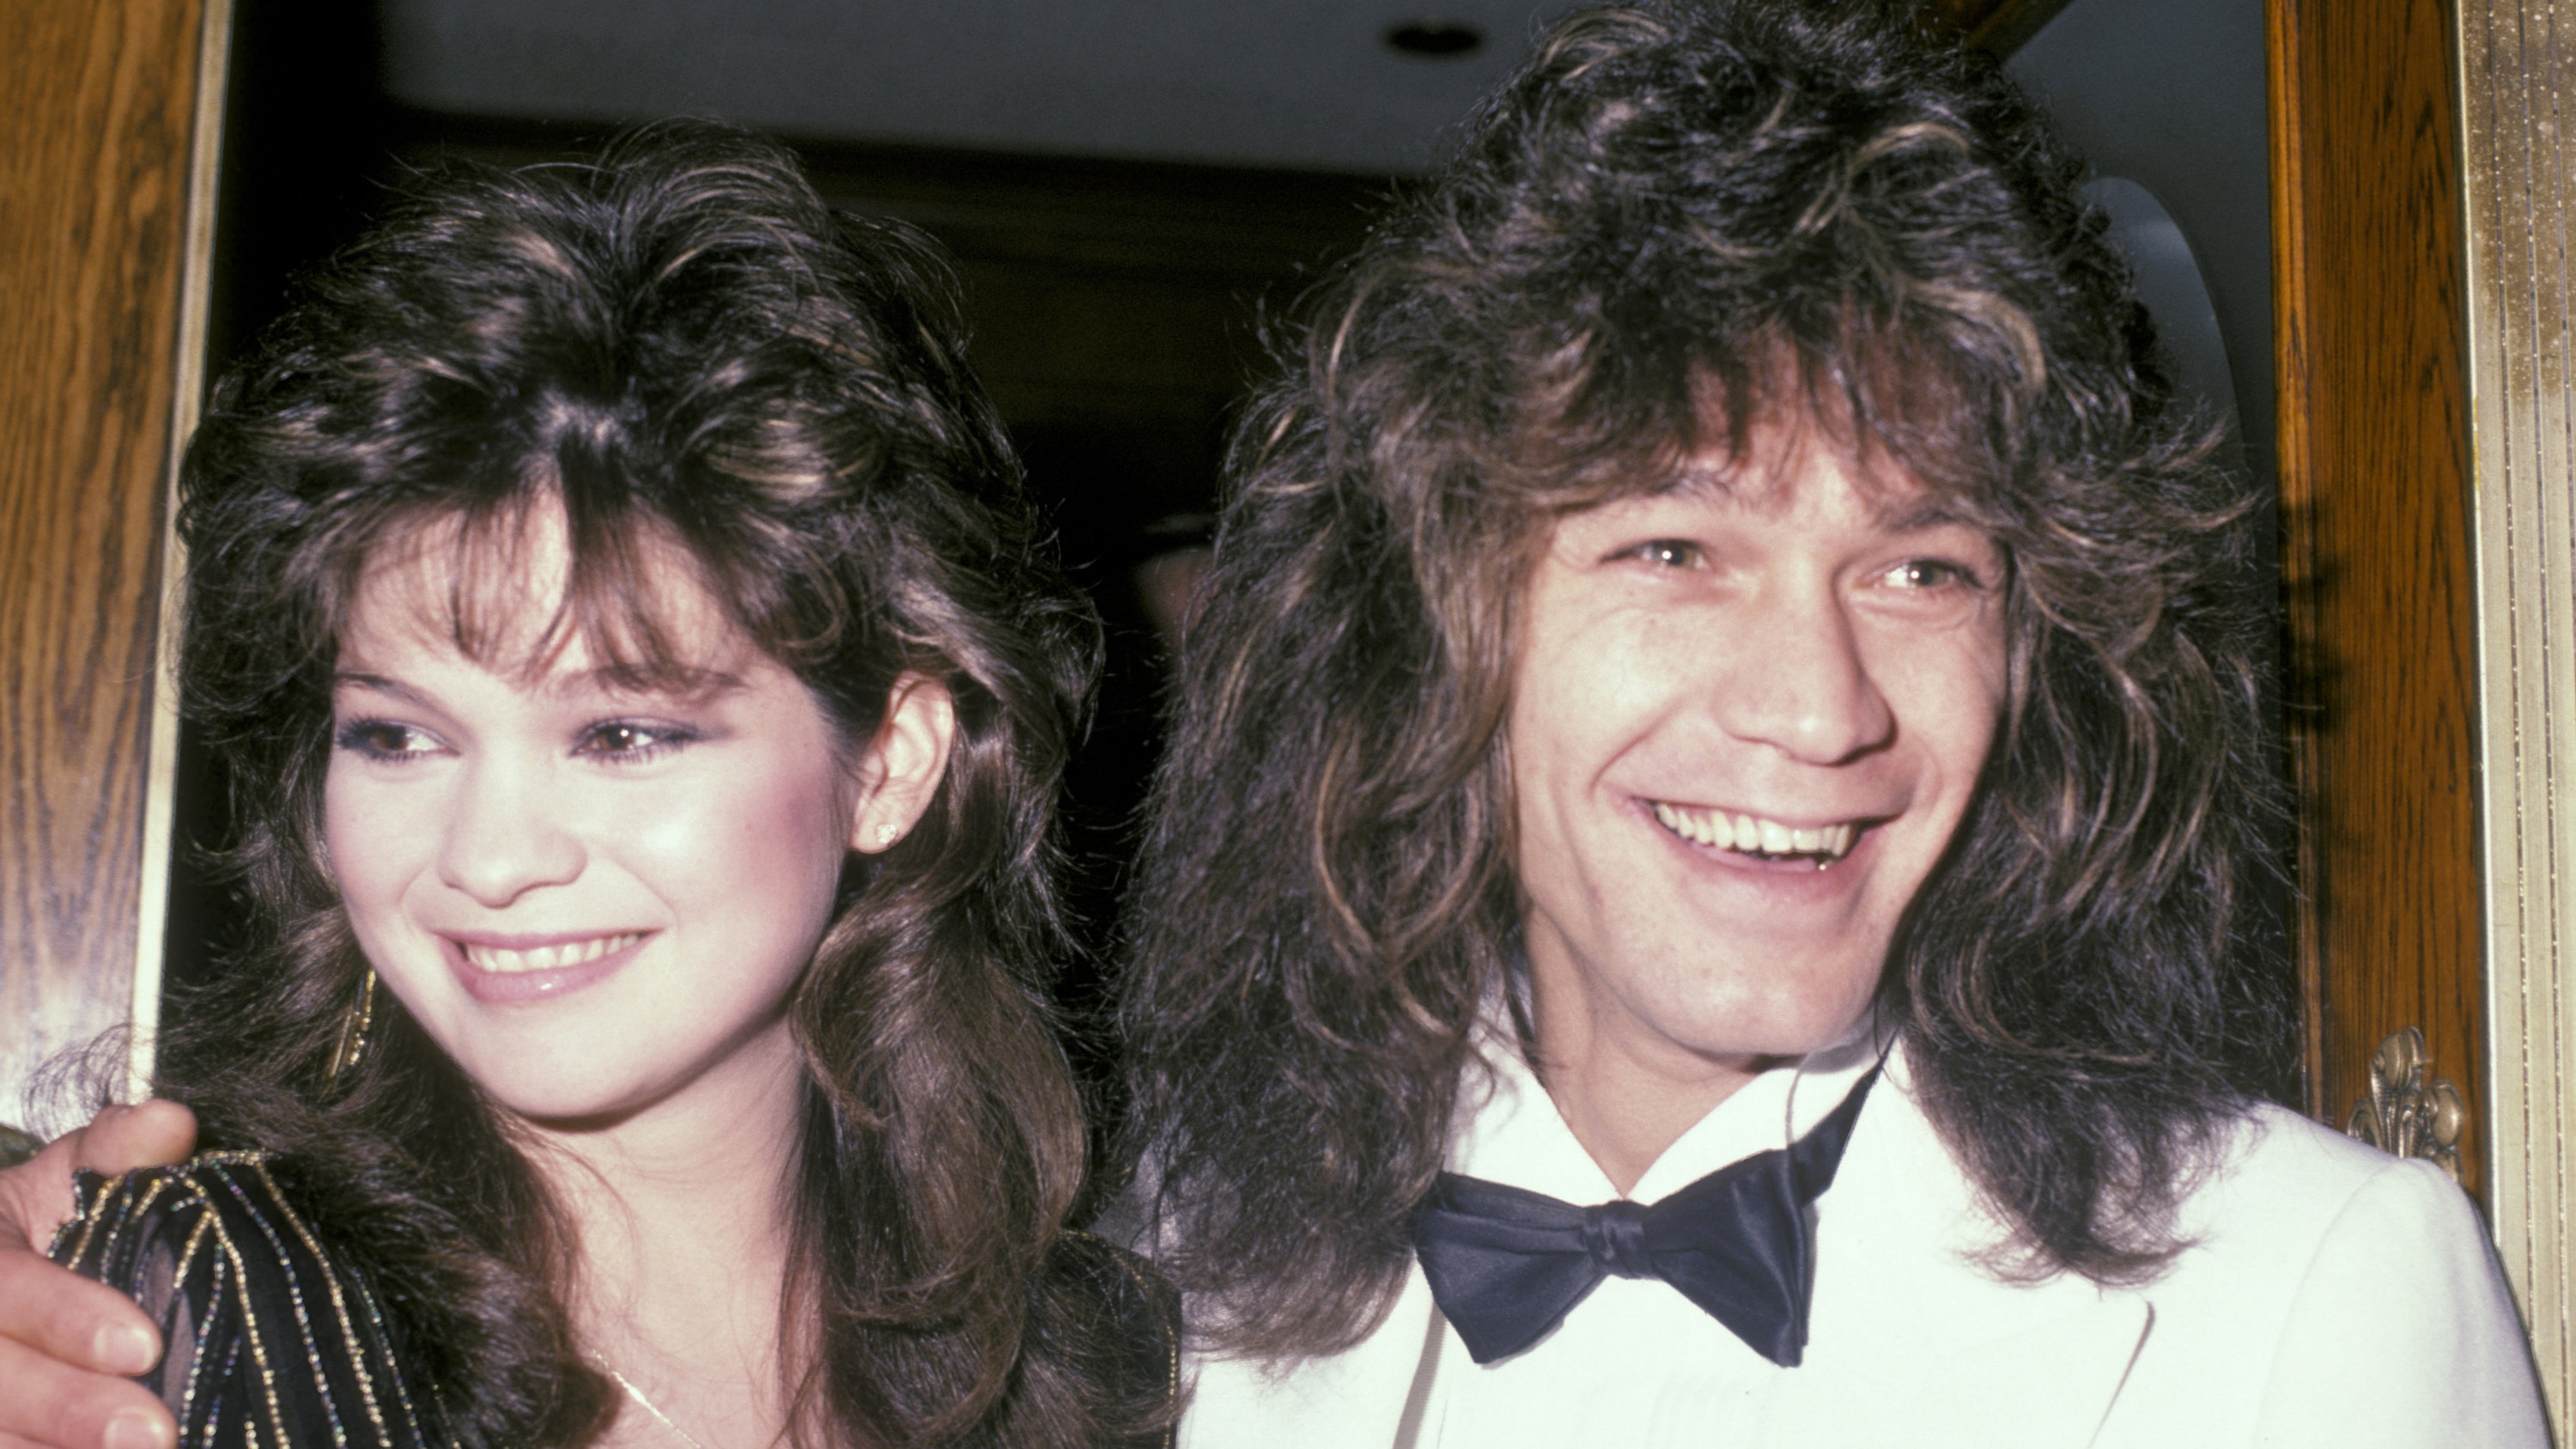 Valerie Bertinelli shared a text message from Eddie Van Halen to honor the rocker on his 66th birthday